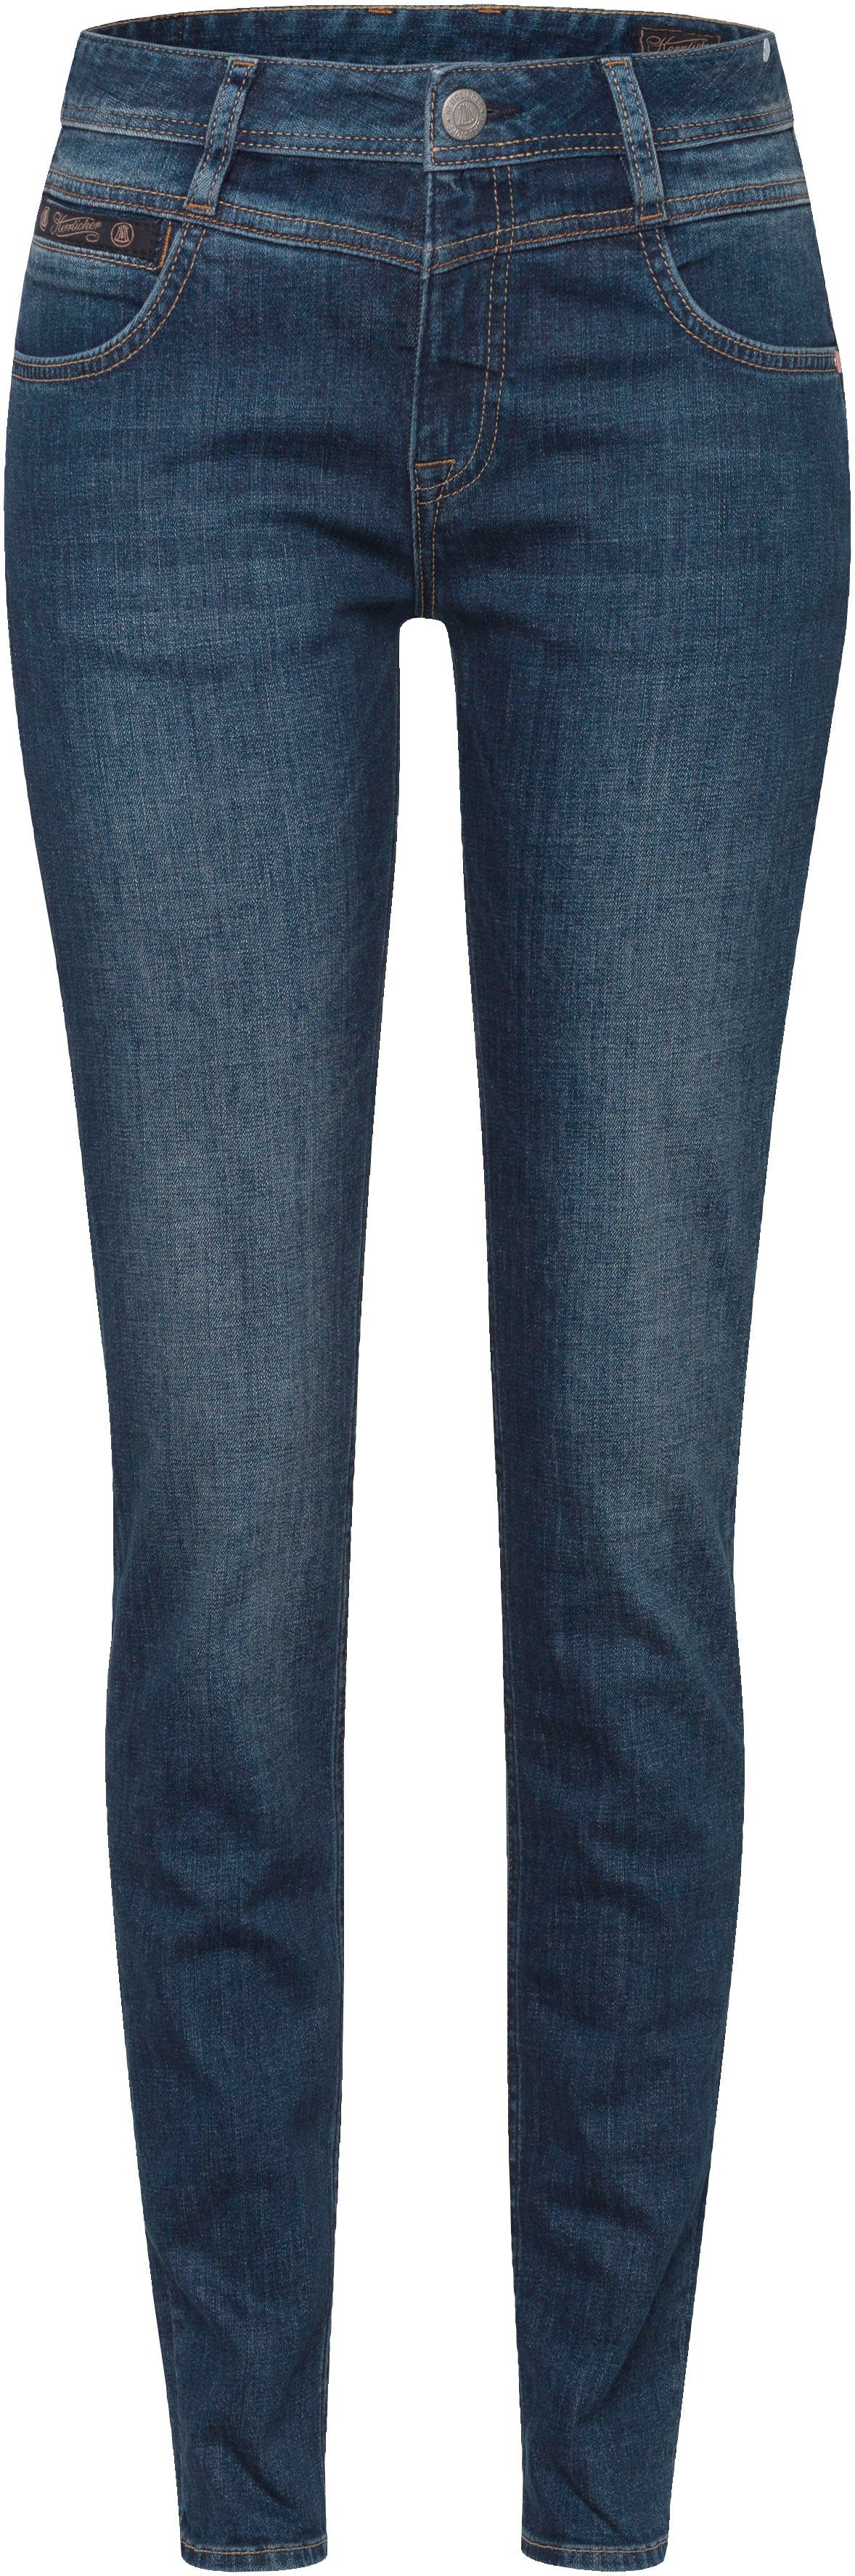 Waist PEPPY 034 Normal SLIM Polyester RECYCLED Slim-fit-Jeans Herrlicher Recycled used DENIM